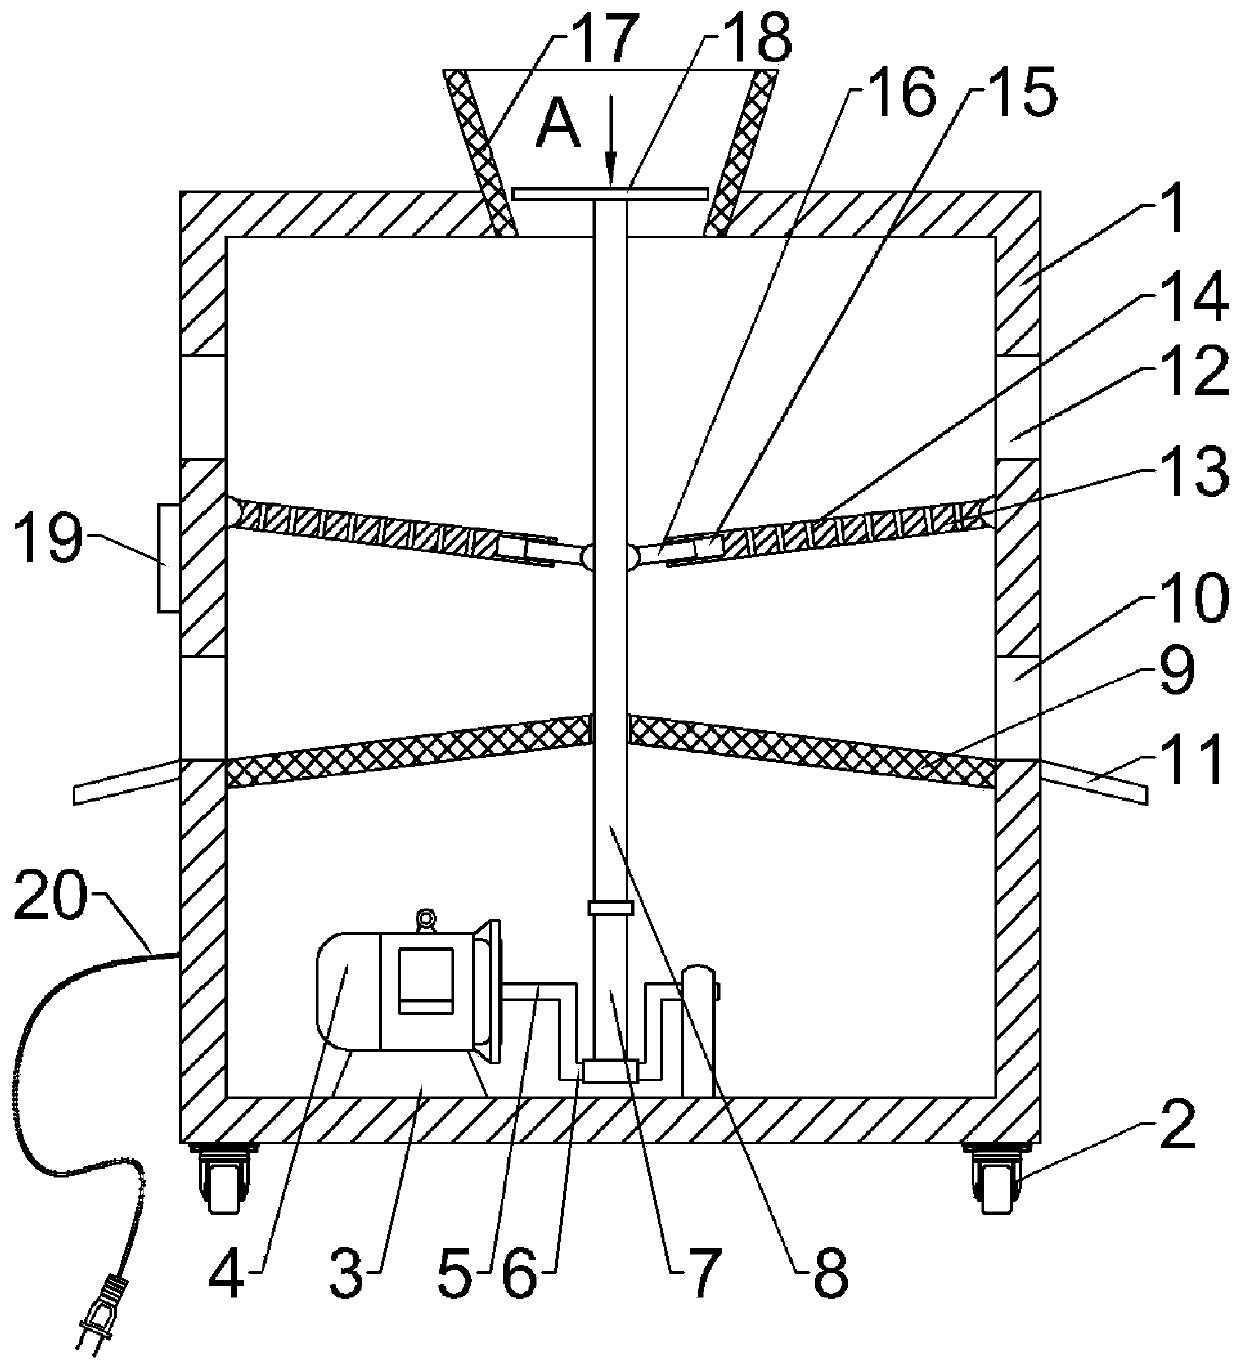 An anti-clogging screening device for sawdust